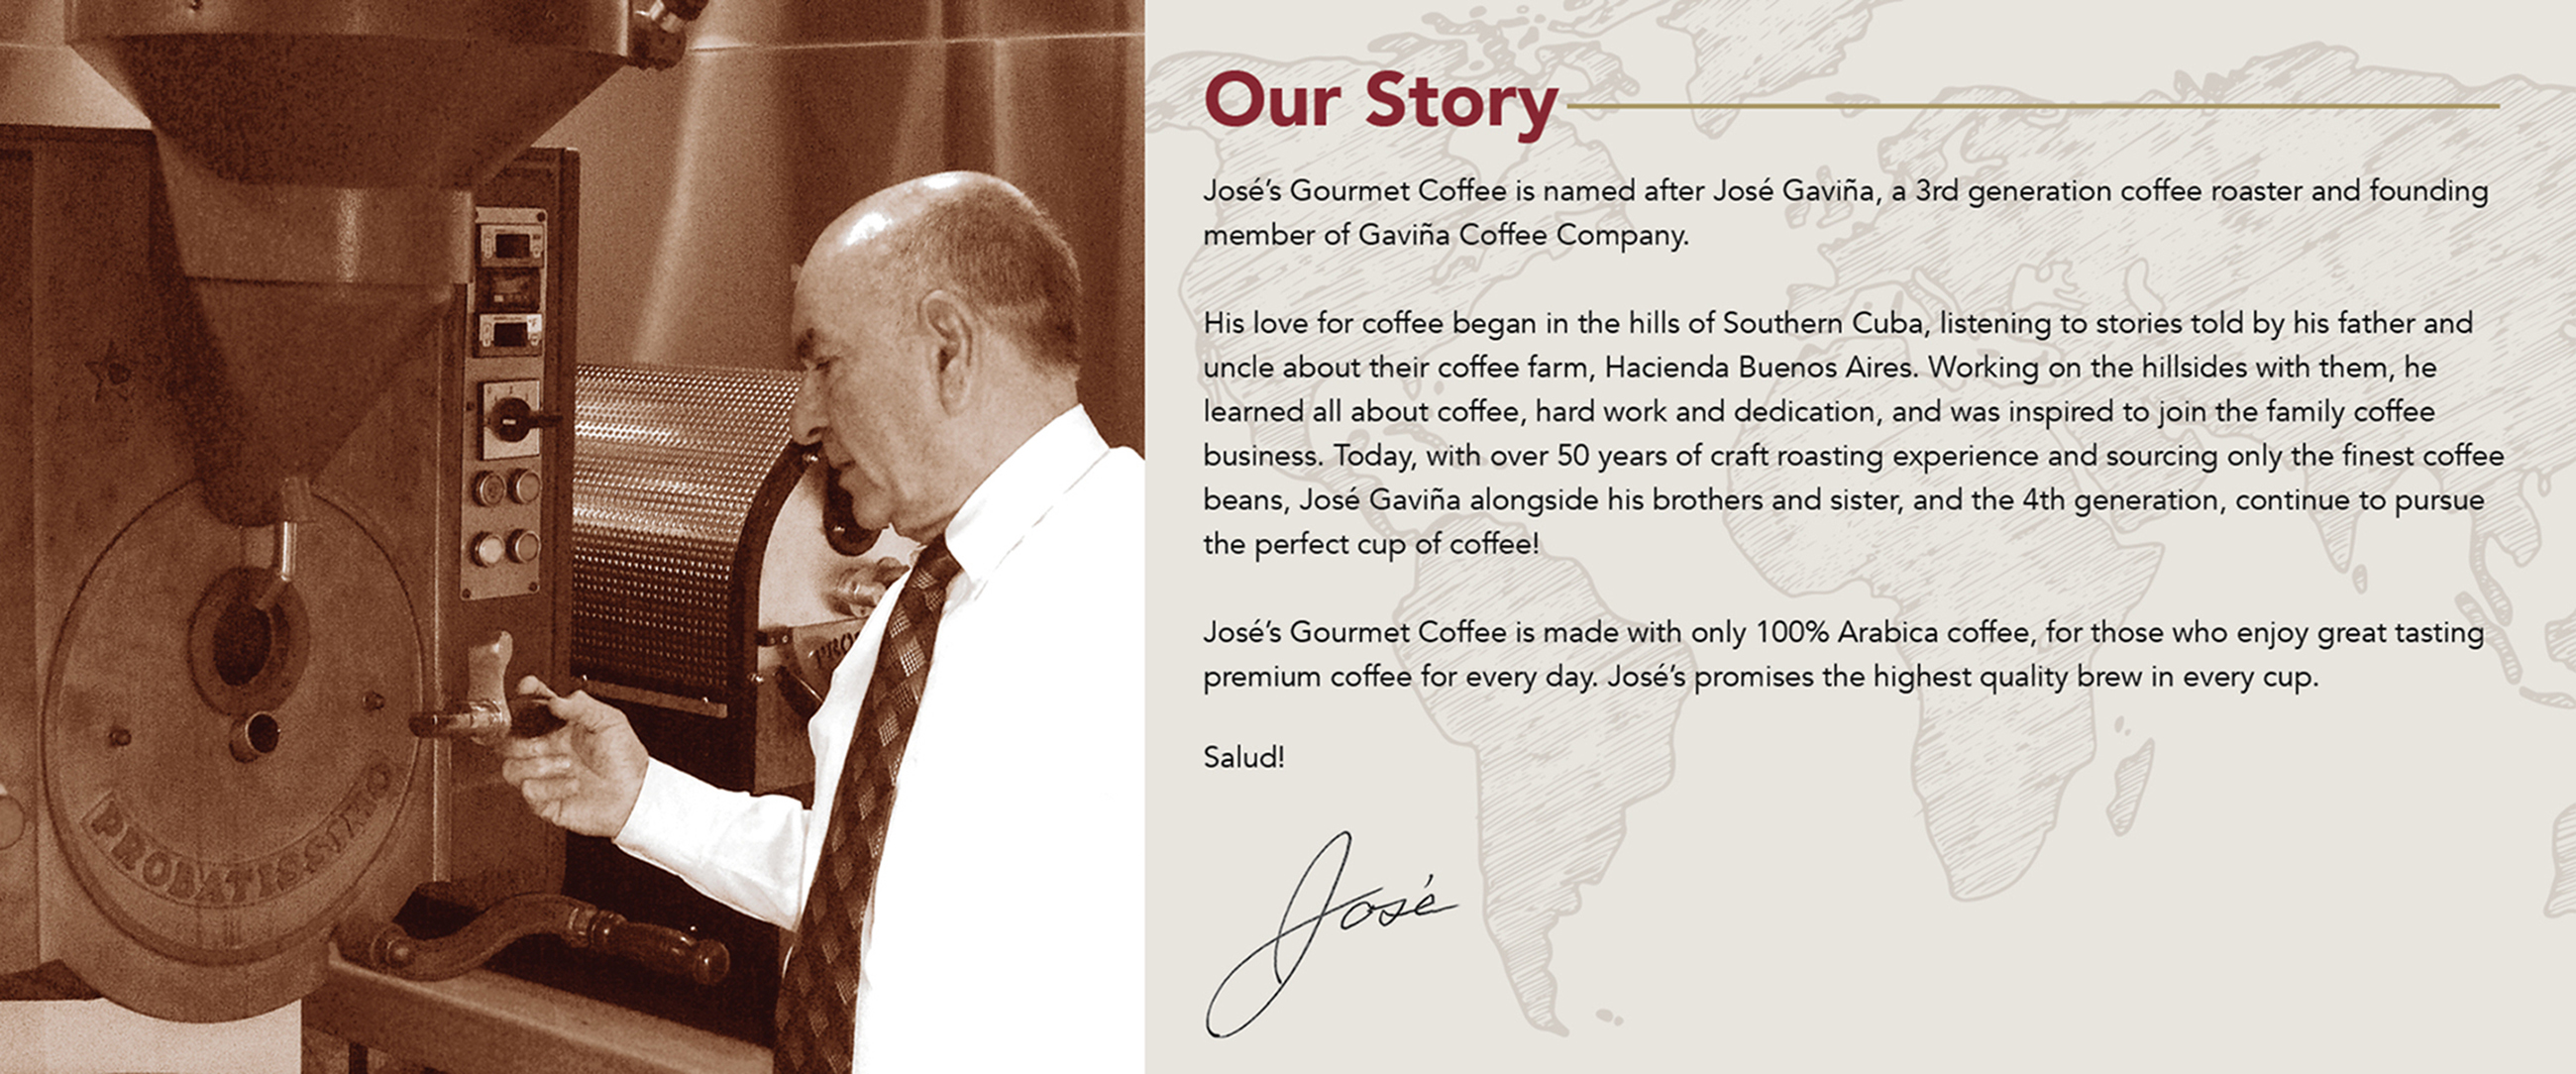 Joses Gourmet Coffee About Us